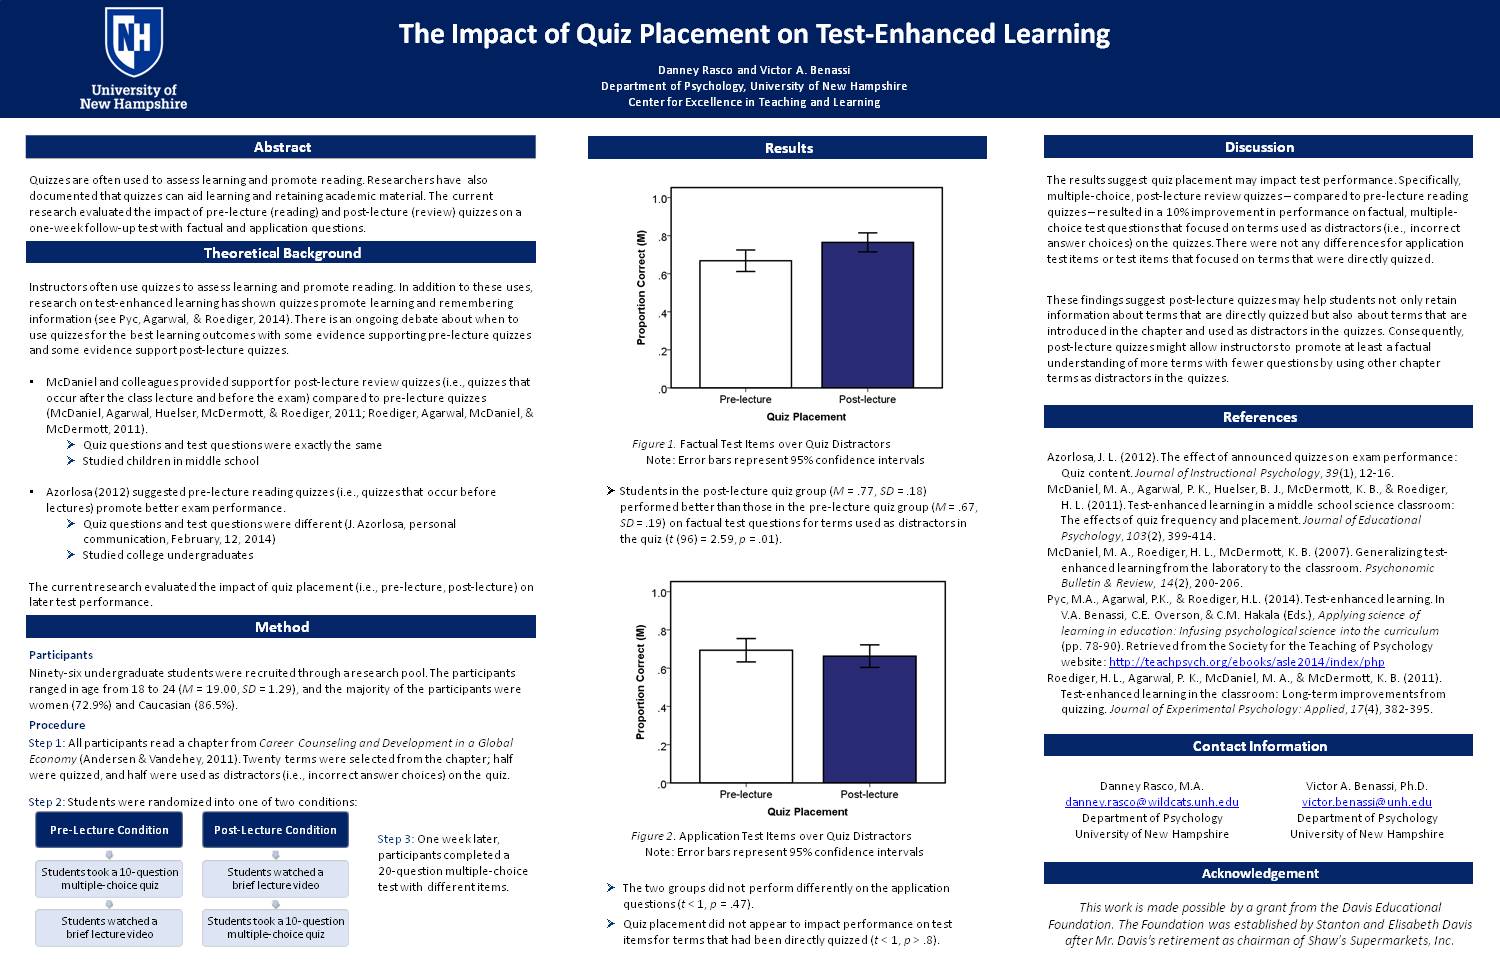 Impact Of Quiz Placement On Test-Enhanced Learning by ddp29